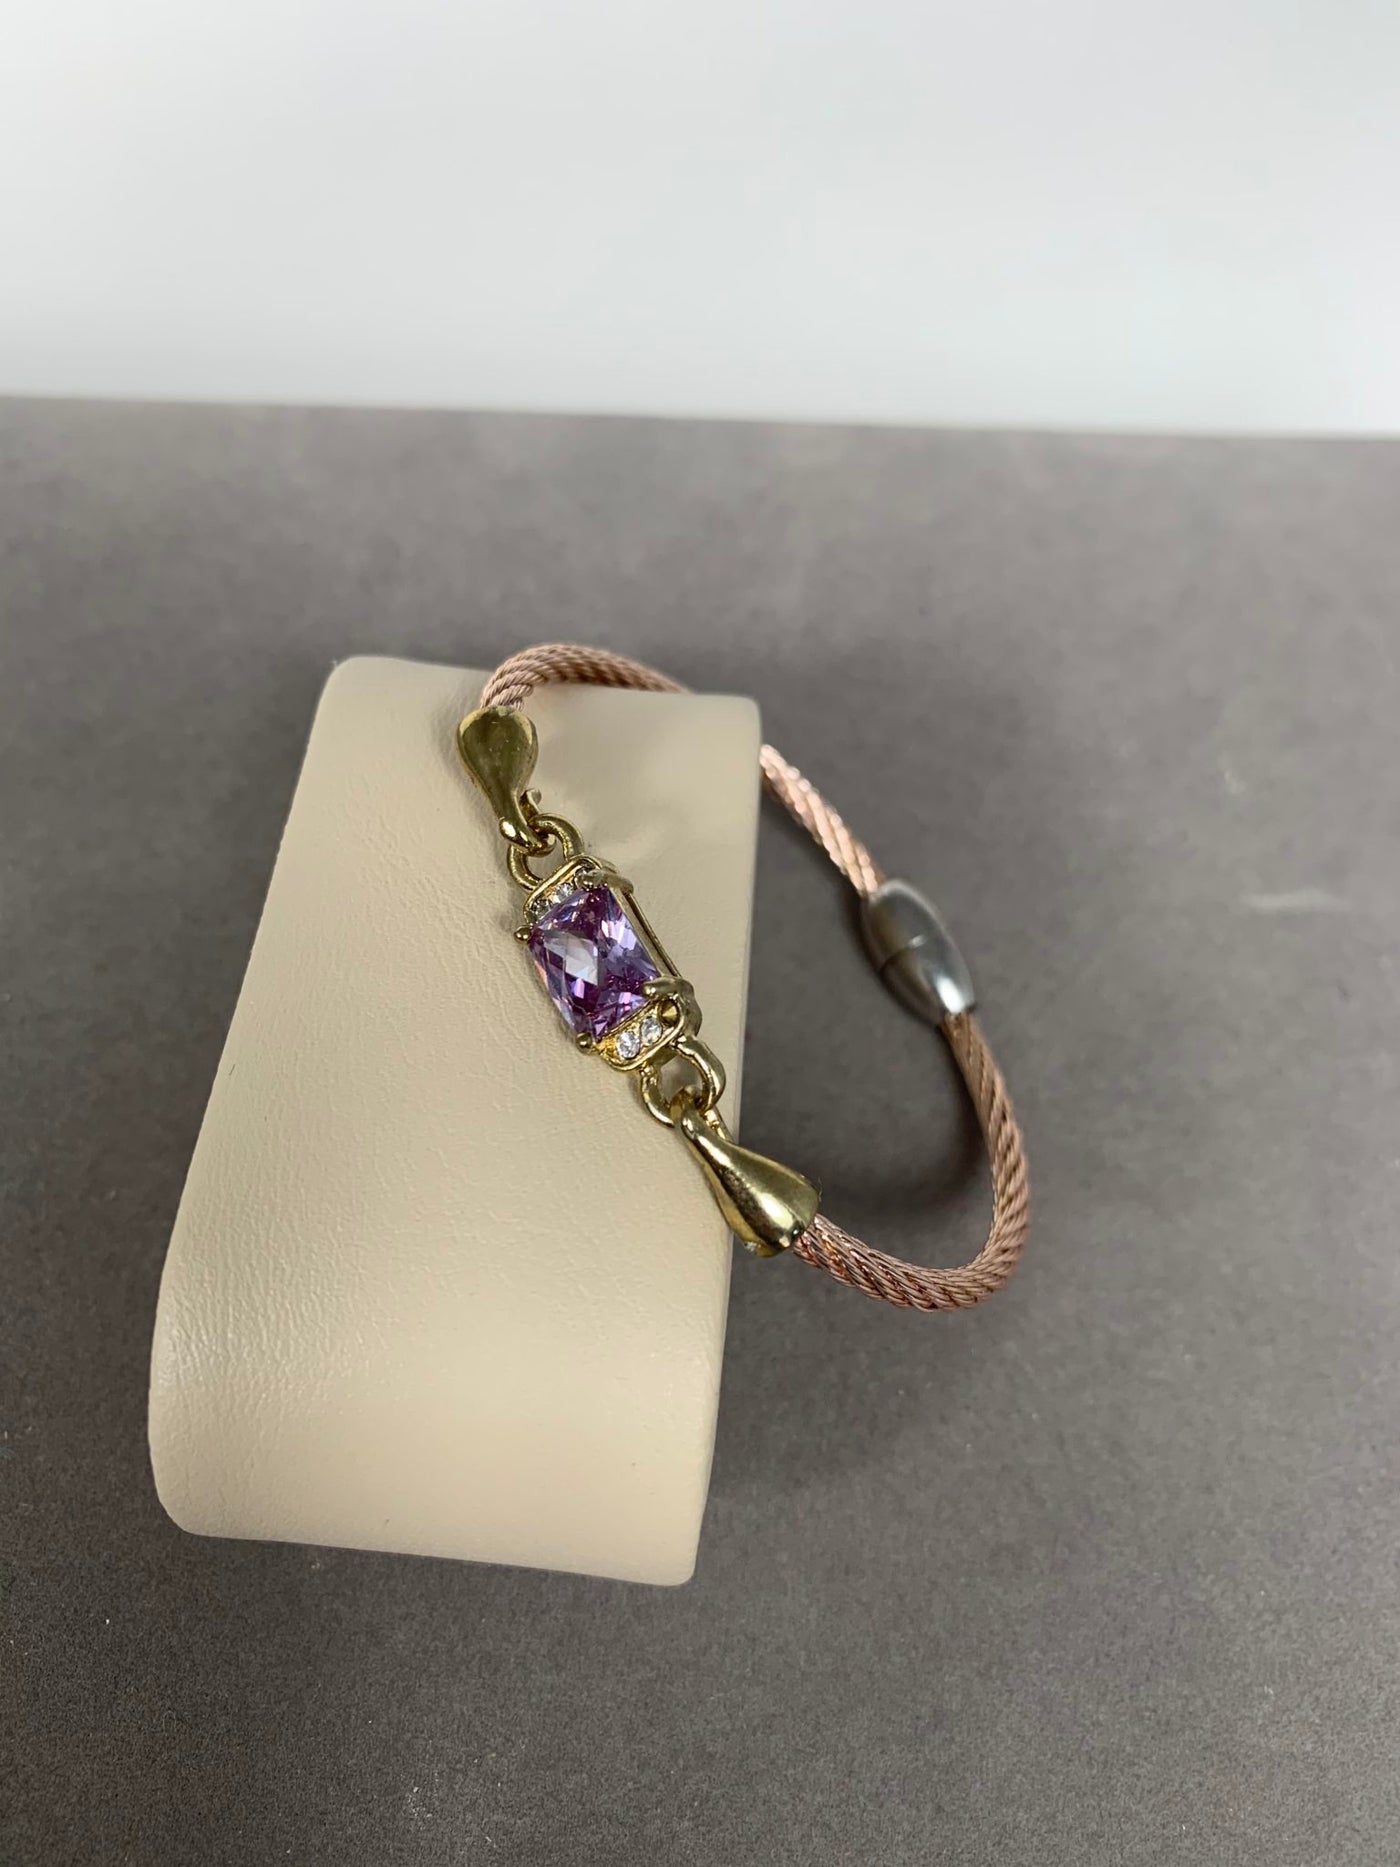 Rose Gold Tone Wire Bangle Bracelet featuring Purple Crystal